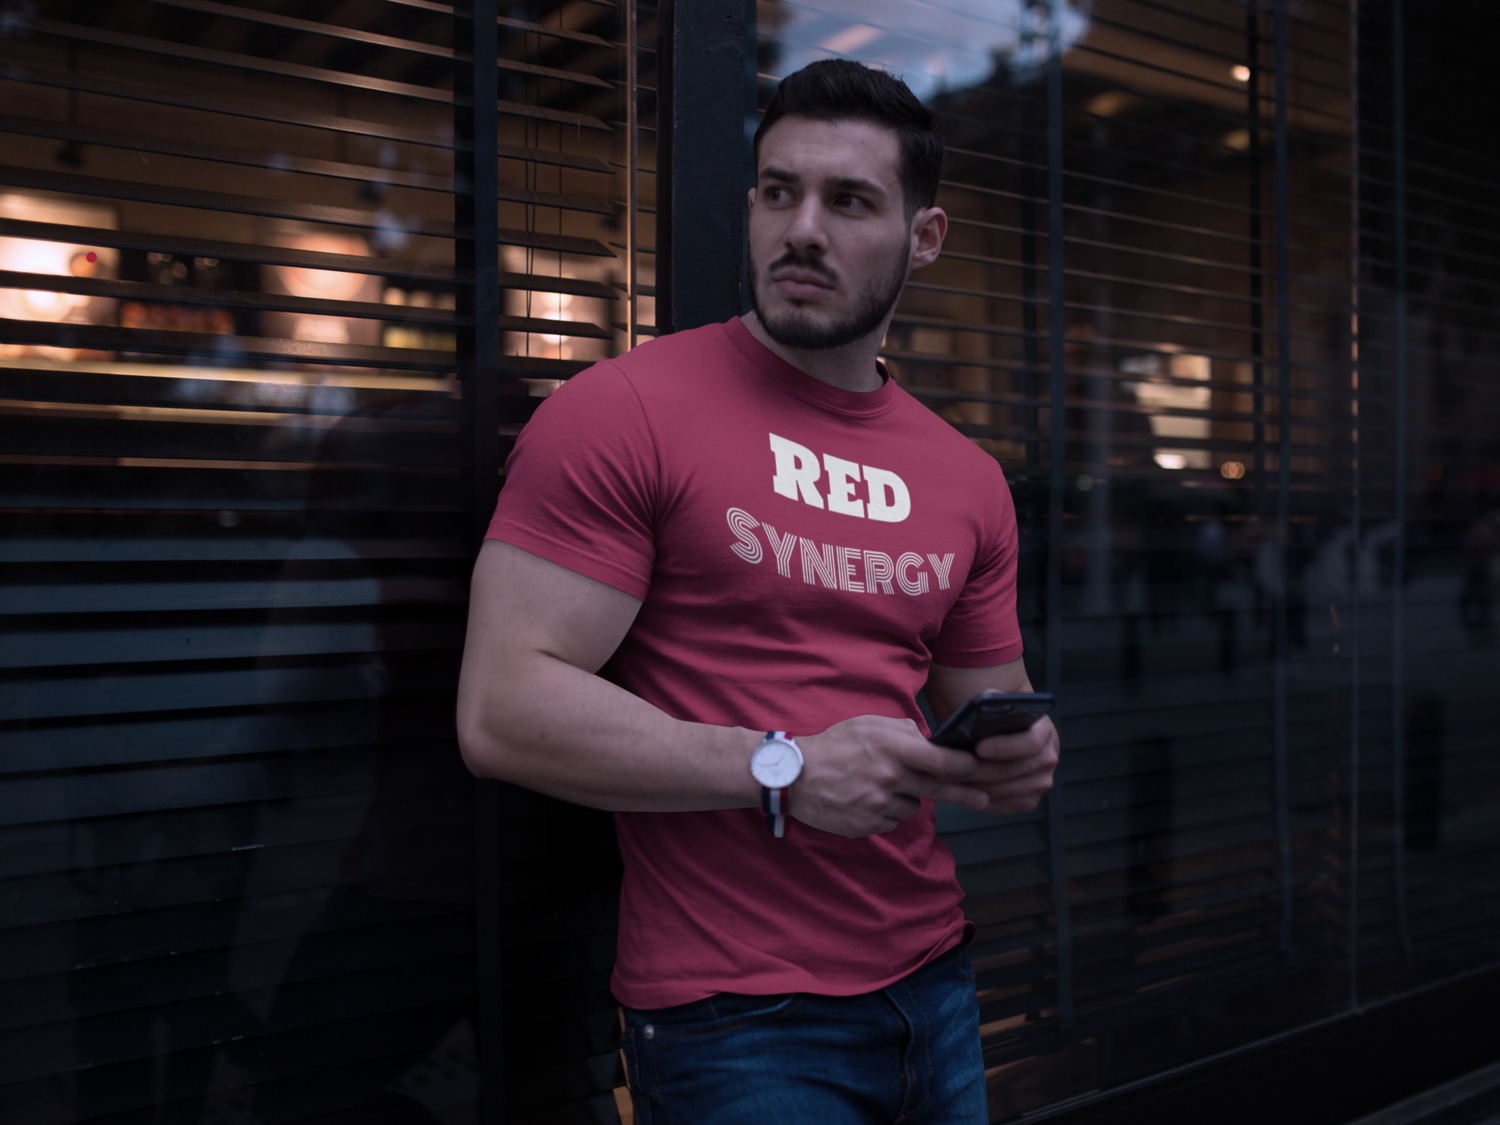 "RED Synergy" Men's Classic Red T-Shirt